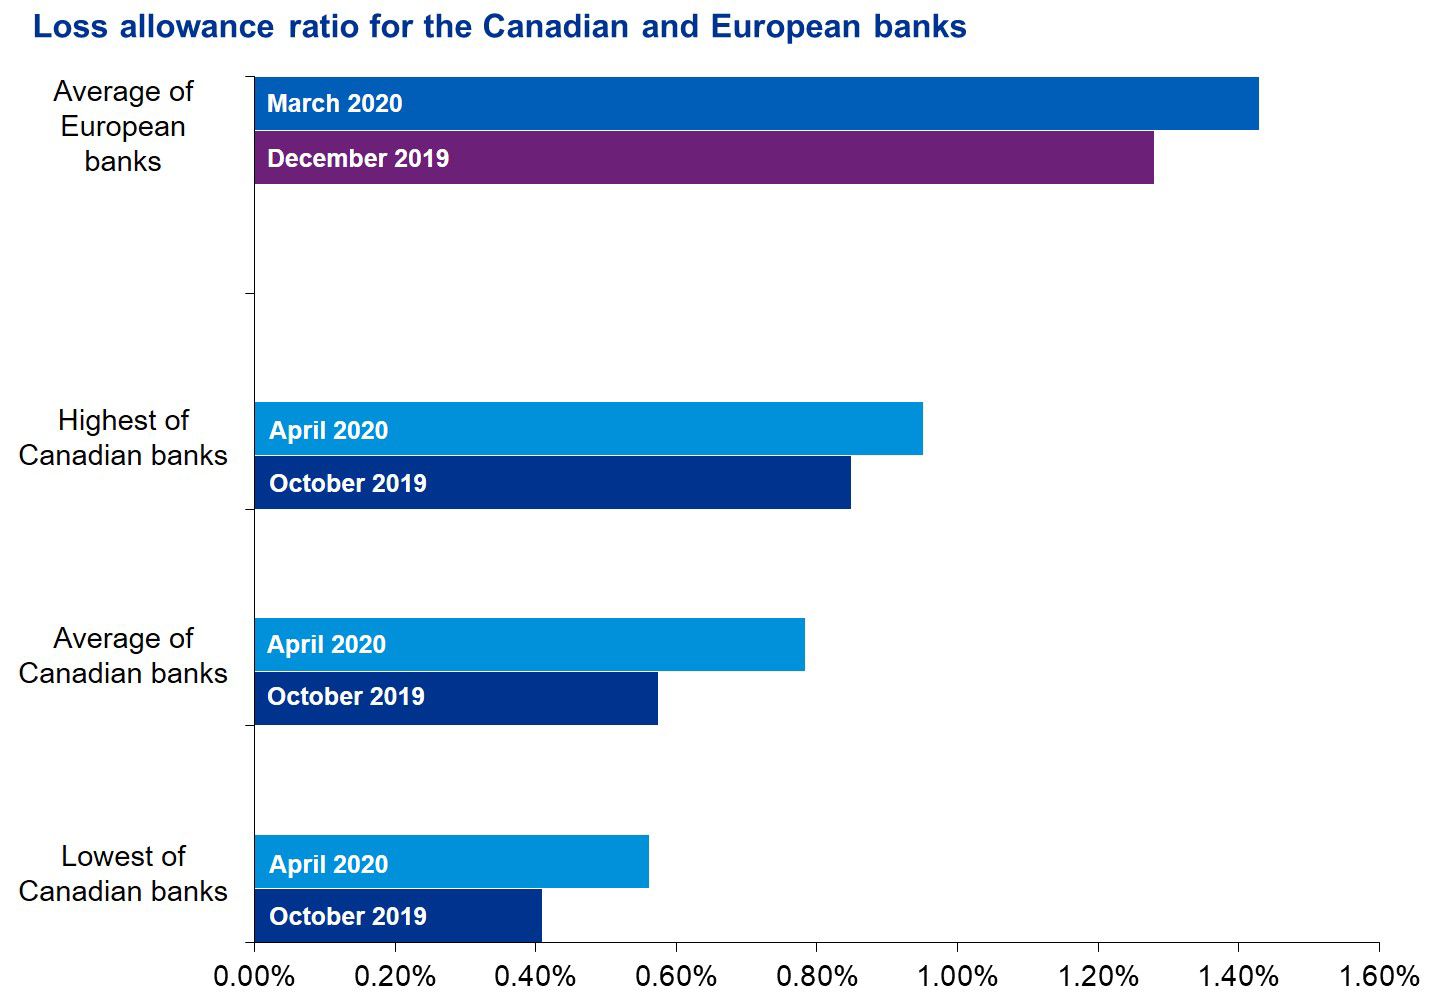 Loss allowance for Canadian and European banks